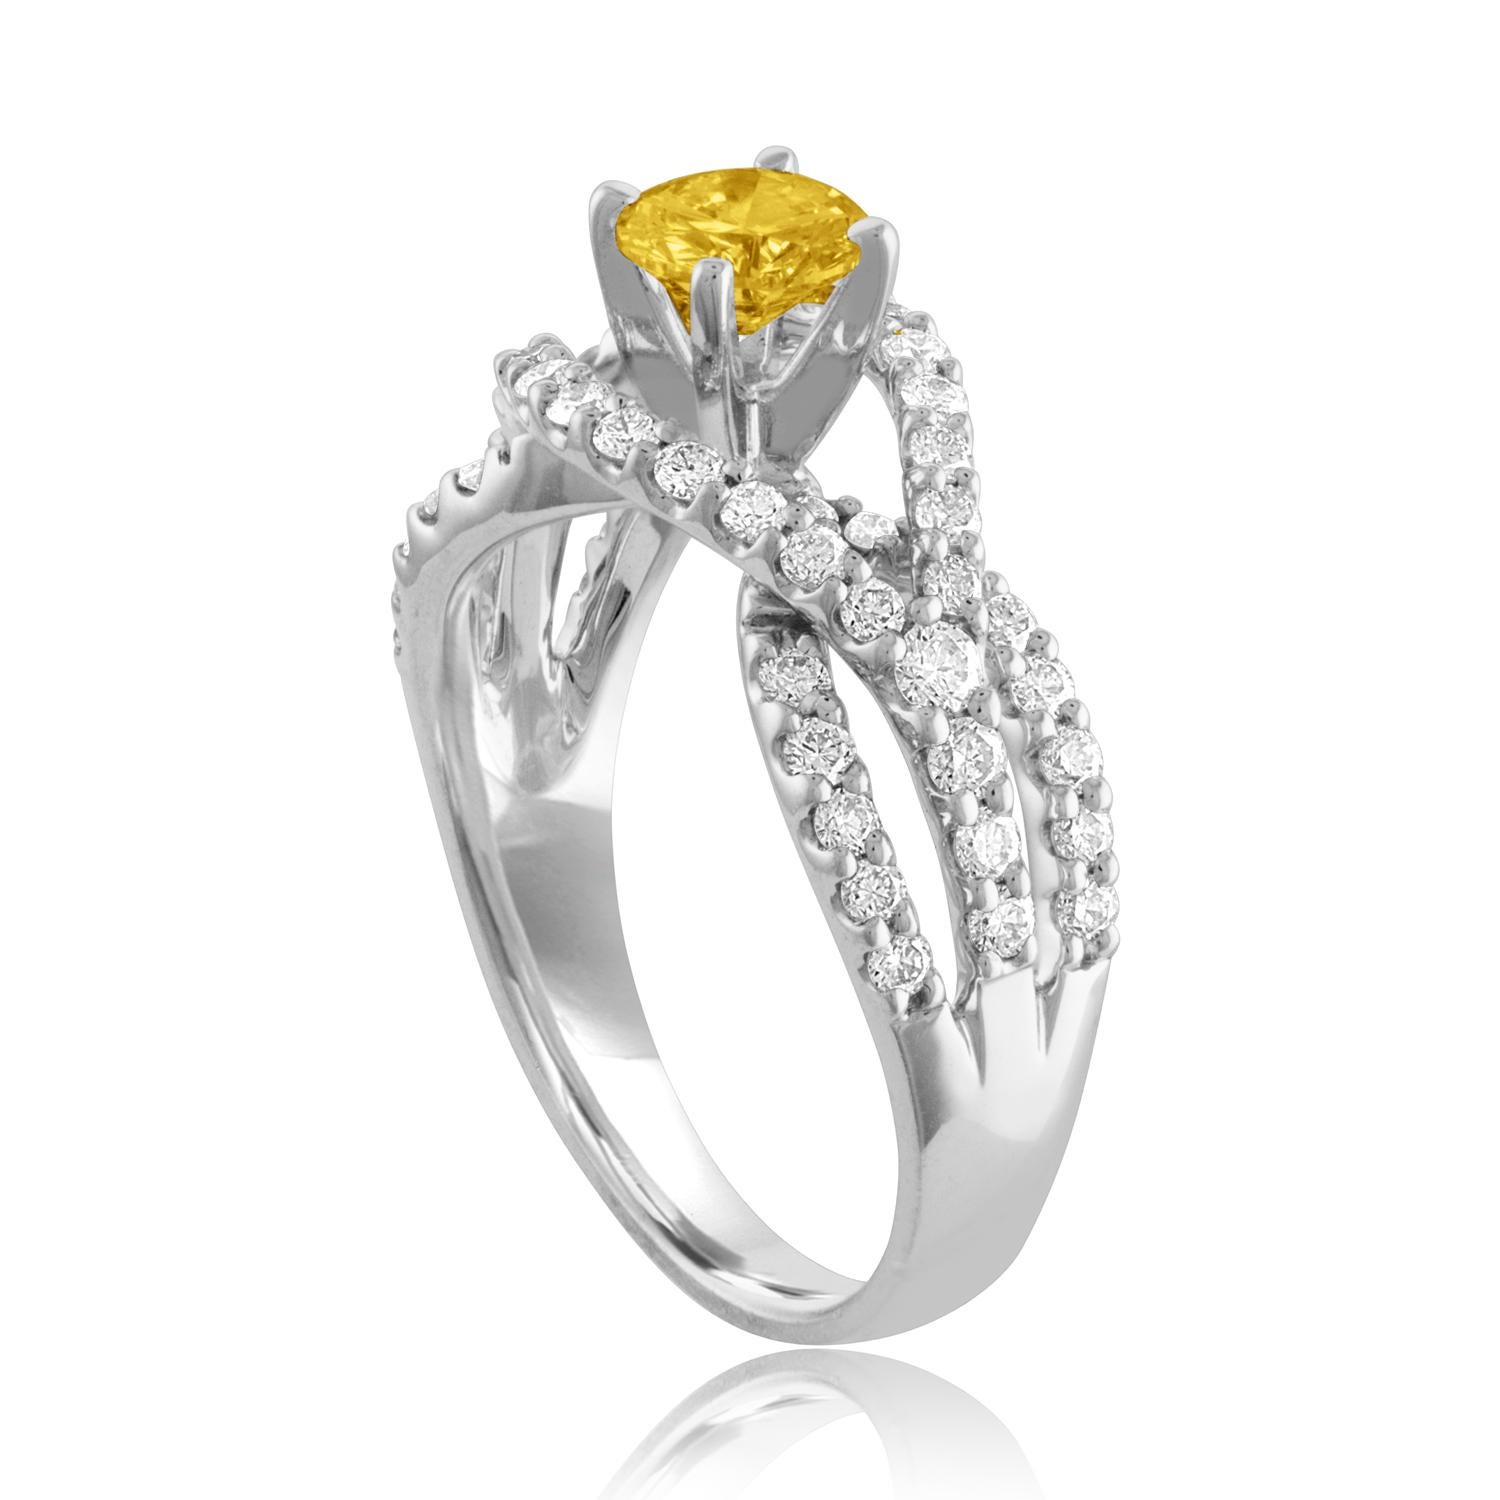 Beautiful Twist Shank Ring
The ring is 18K White Gold
The Center Stone is a Round Yellow Sapphire 0.59 Carats
The Sapphire is AGL Certified Heated
There are 0.78 Carats in Diamonds F/G VS/SI
The ring is a size 6.75, sizable.
The ring weighs 5.1 grams